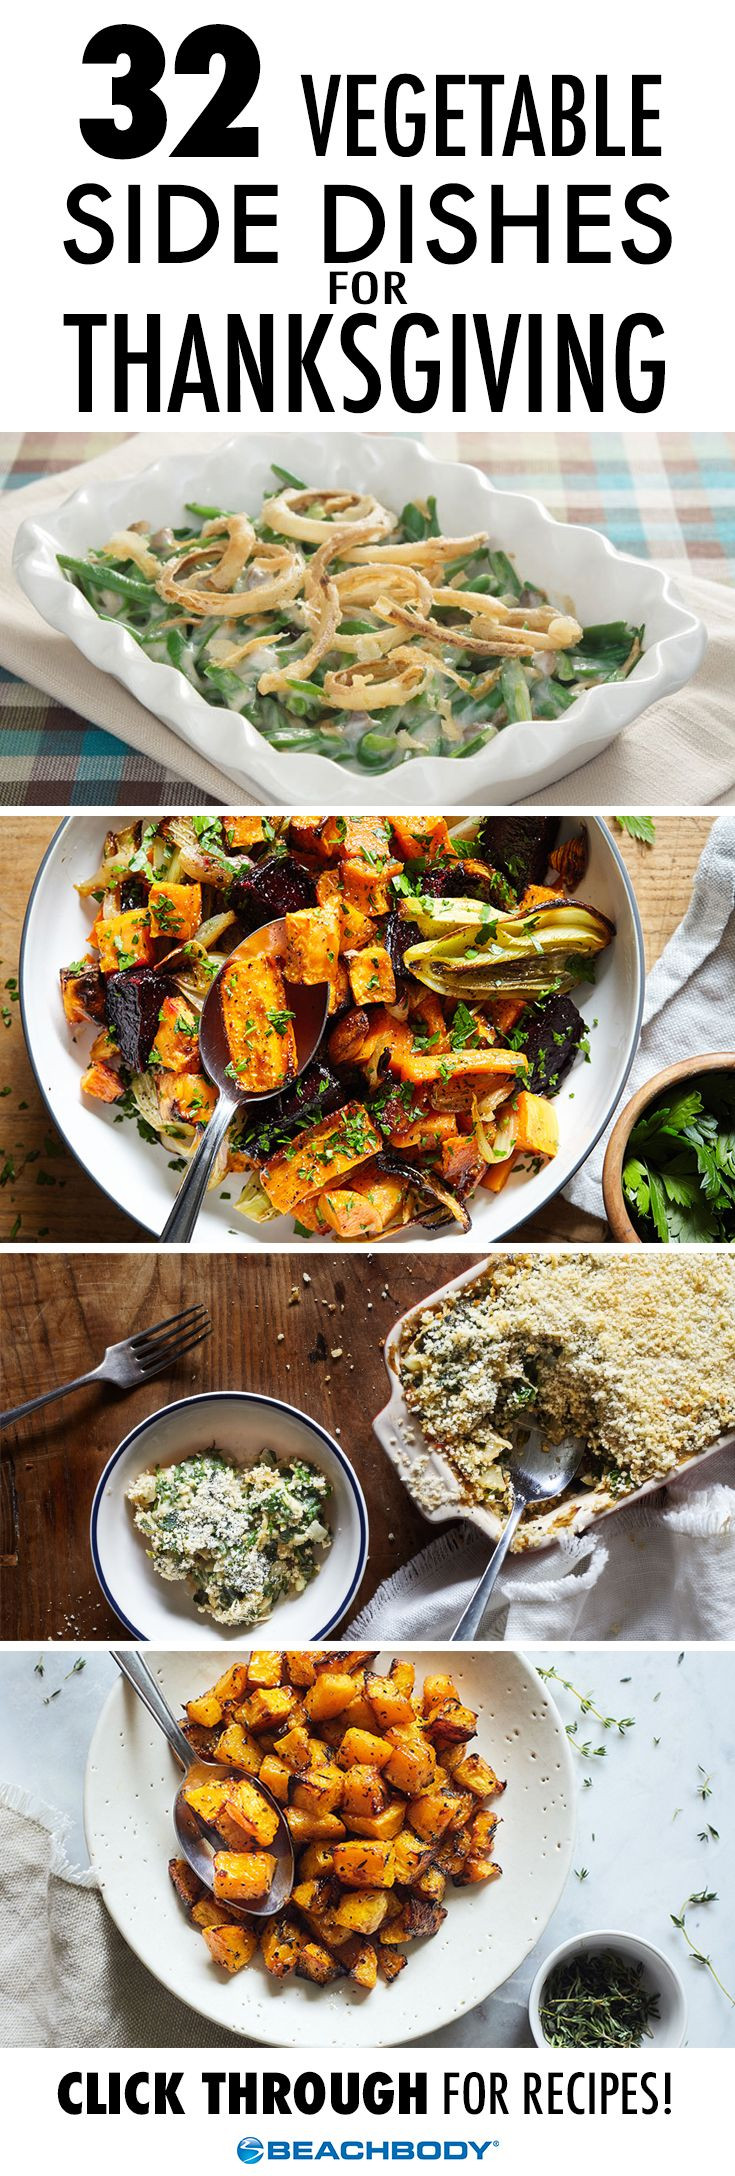 Veggie Side Dishes For Thanksgiving
 837 best images about Healthy Recipes on Pinterest